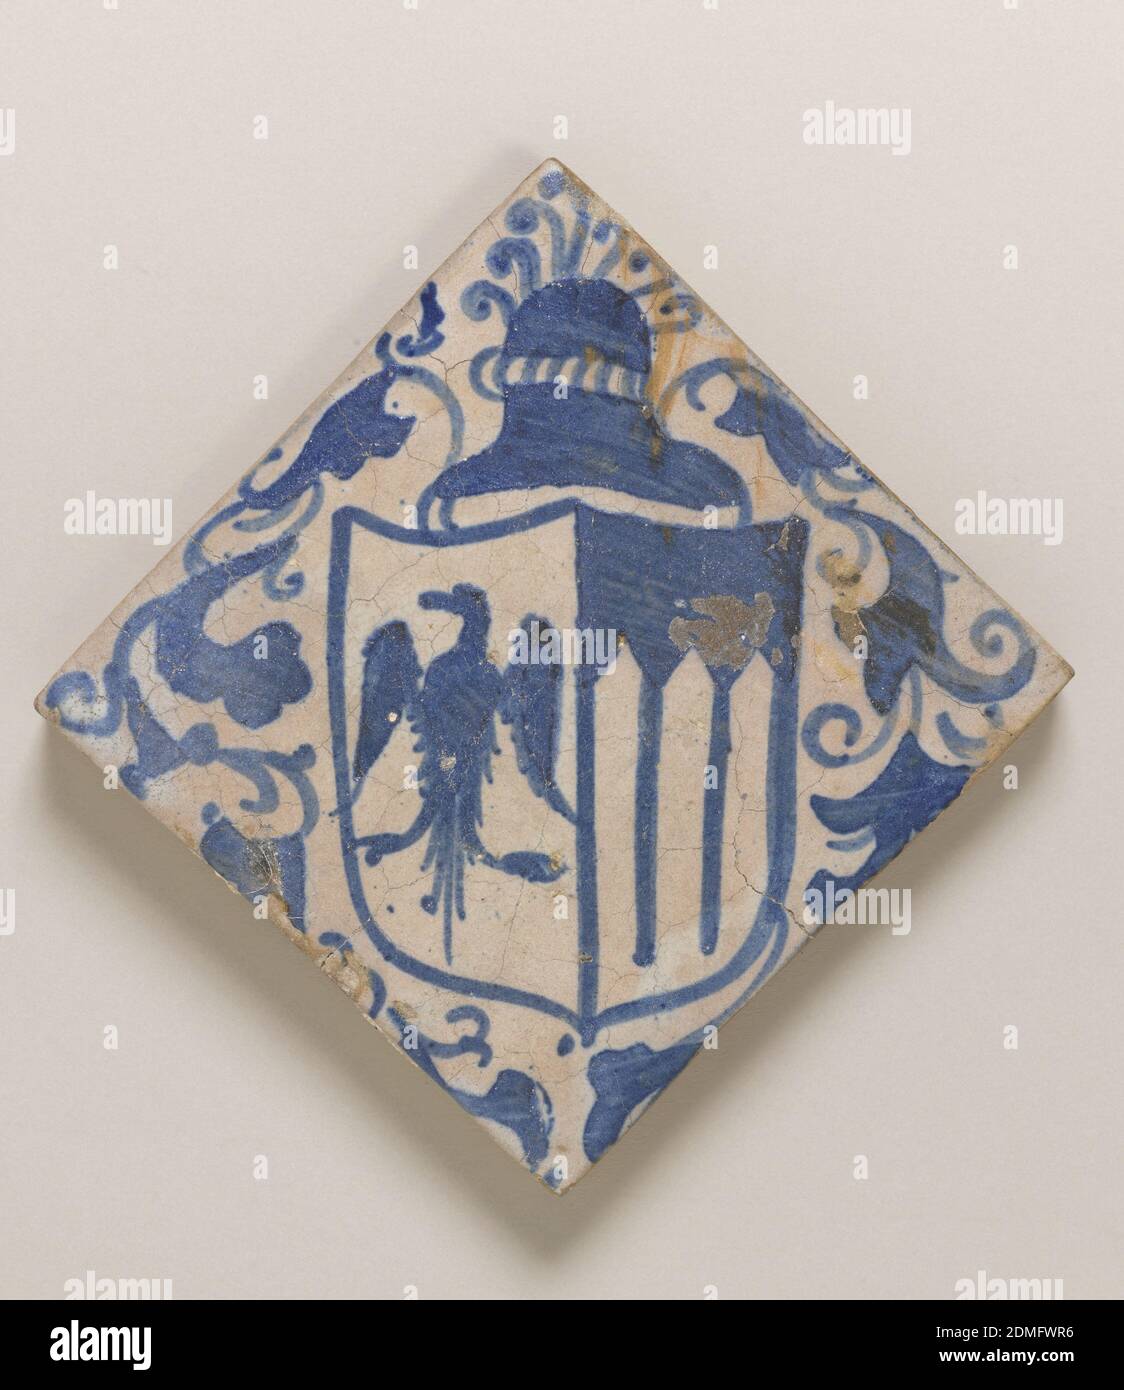 Floor tile, Glazed and painted earthenware, Square tile of buff clay with  thin underfired opaque grayish-white glaze. Underglaze blue painting of  diagonally placed heraldic shield with eagle and three pointed arches.  Above,